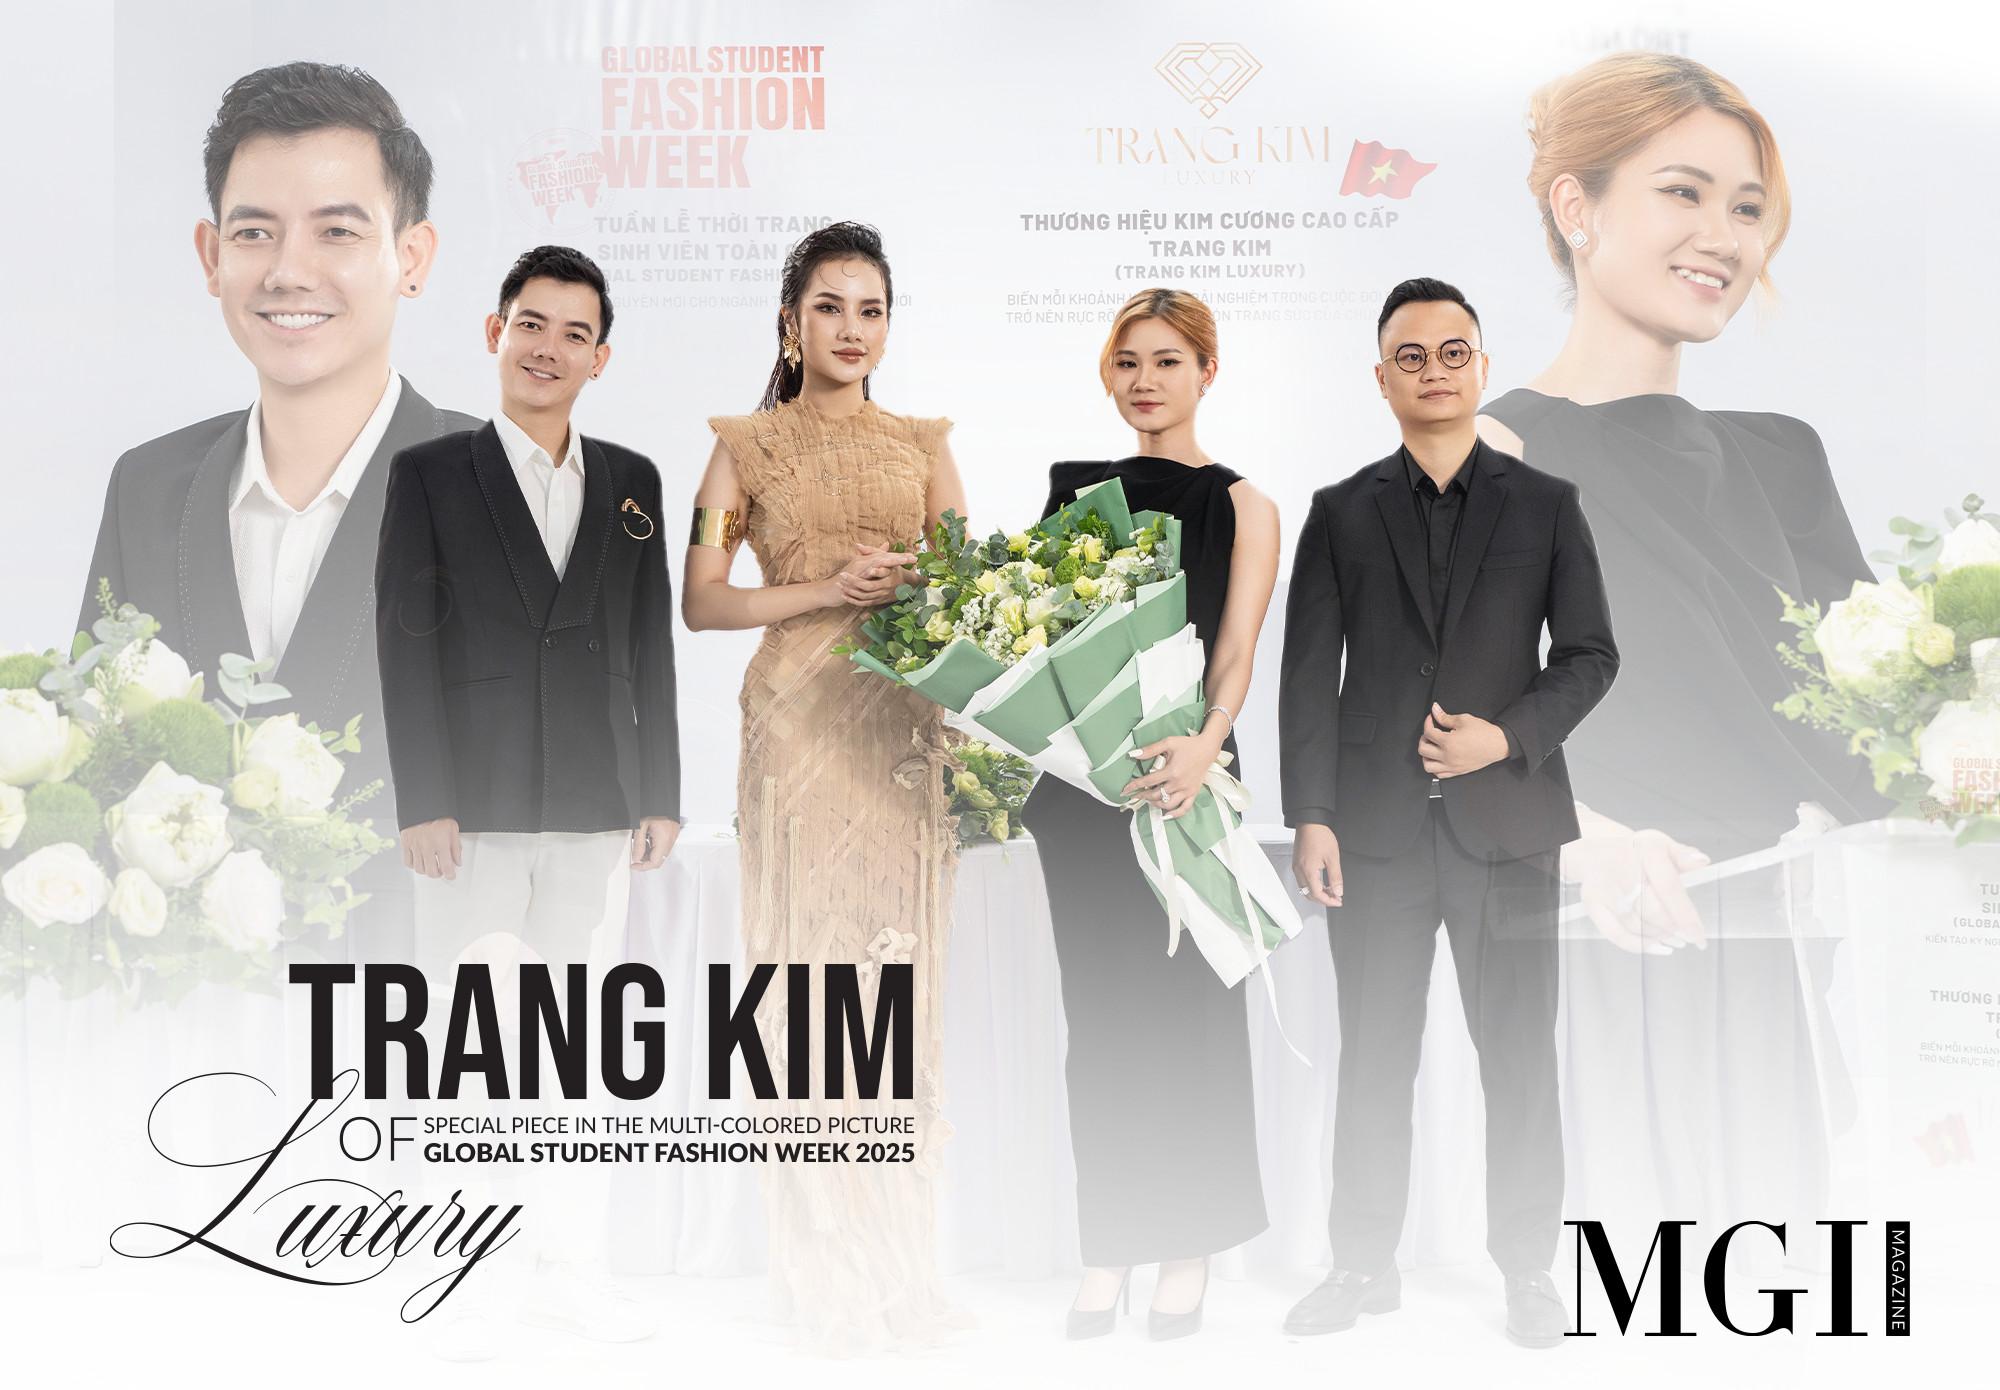 Trang Kim Luxury - Special piece in the multi-colored picture of Global Student Fashion Week 2025